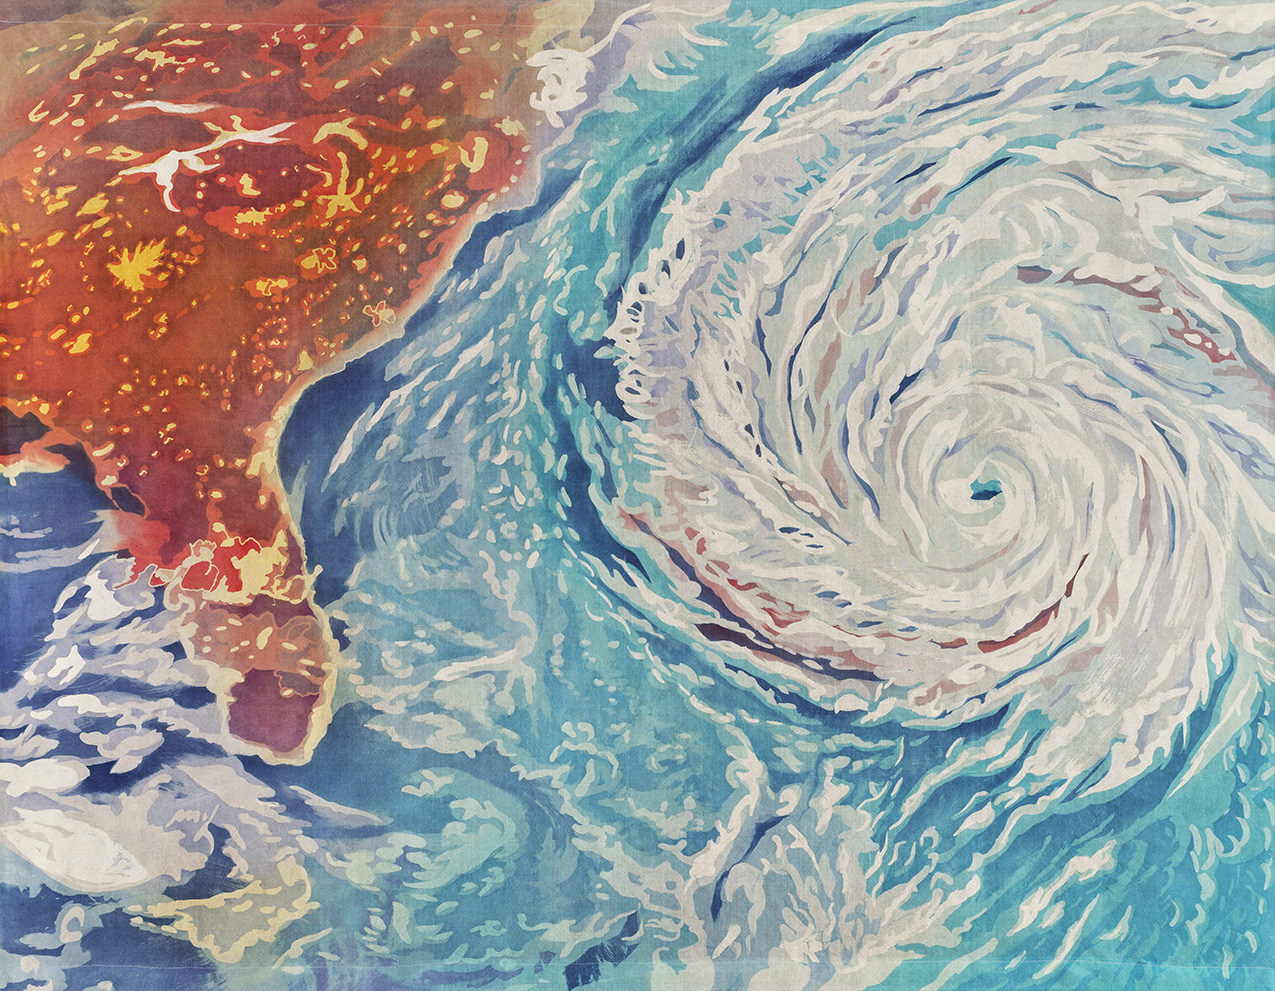 abstract painting of Hurricane Florence approaching the eastern coast of the US, as seen from space